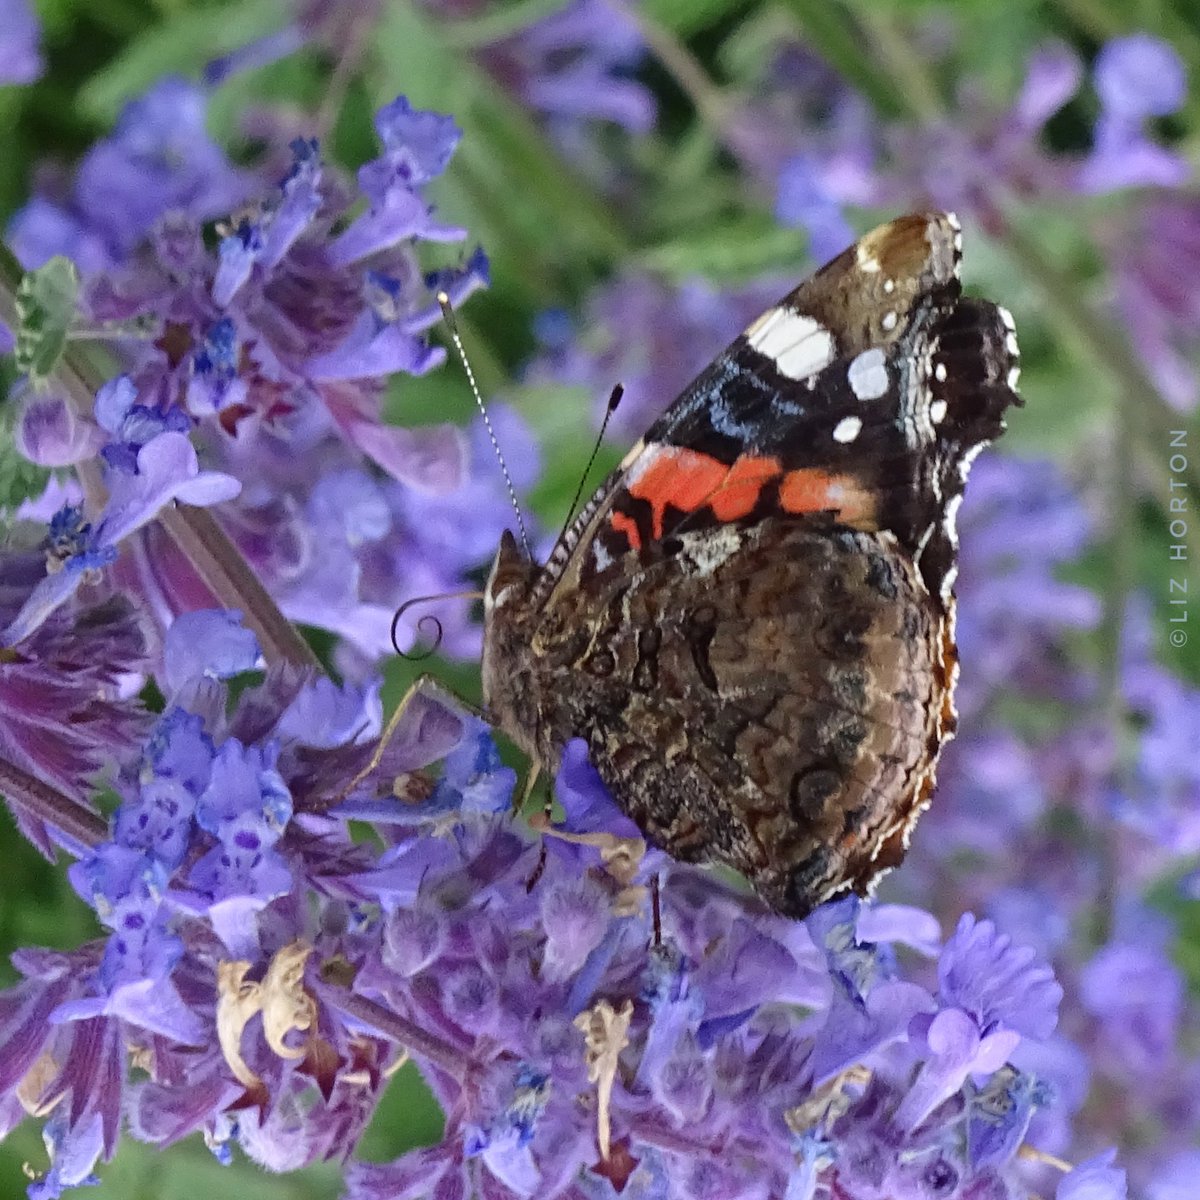 Fluttering by with a Red Admiral #butterfly on catmint..to wish you a Happy Day and relaxing weekend..
#nature #wildlife #photography
June 21, 2023 #photo 
#SaveButterflies #InsectWeek23
#InsectWeek #NaturePhotography 
Have a super day and #weekend..
#art #naturelovers ... 🌱💜🕊